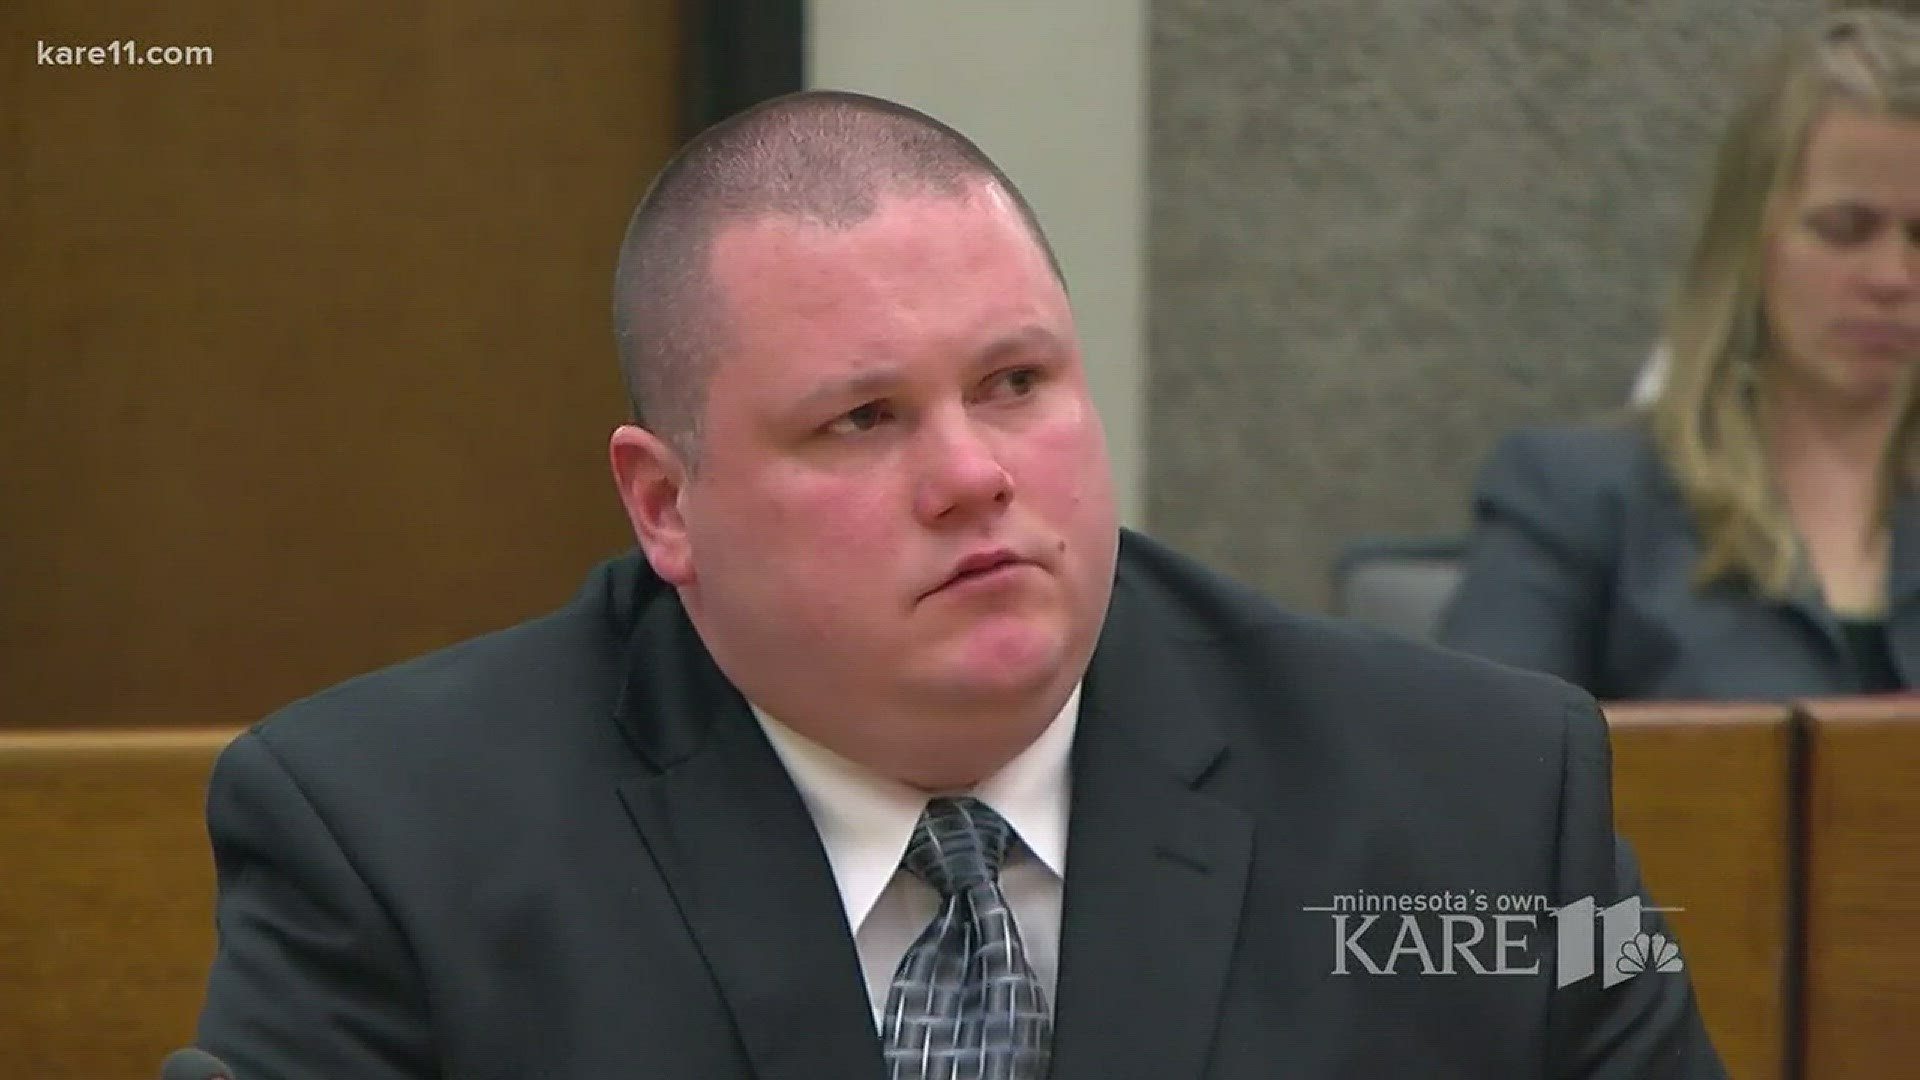 A former Minneapolis police officer will serve six months in the workhouse after he was convicted of assaulting a man while on-duty. http://kare11.tv/2BcnuMN